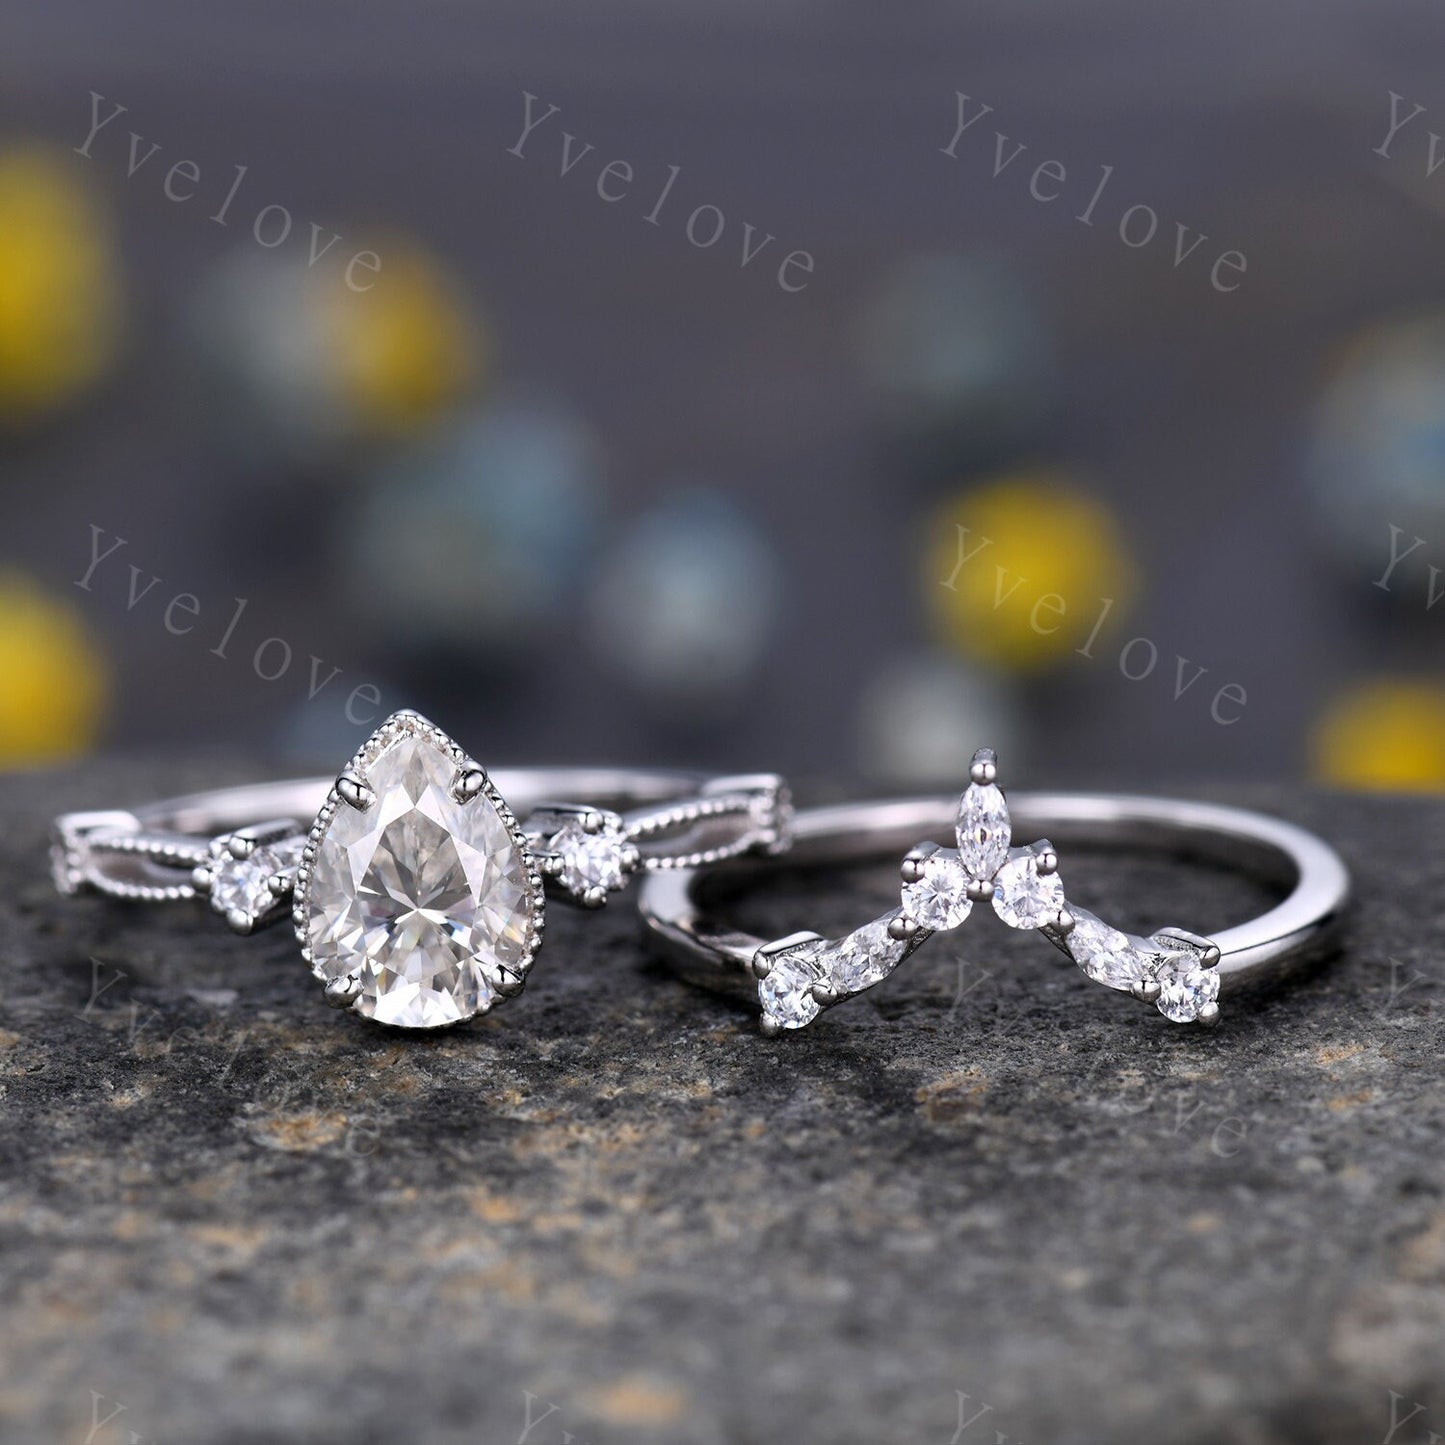 Pear moissanite engagement ring set white gold vintage engagement ring unique cluster marquise diamond wedding anniversary women ring set